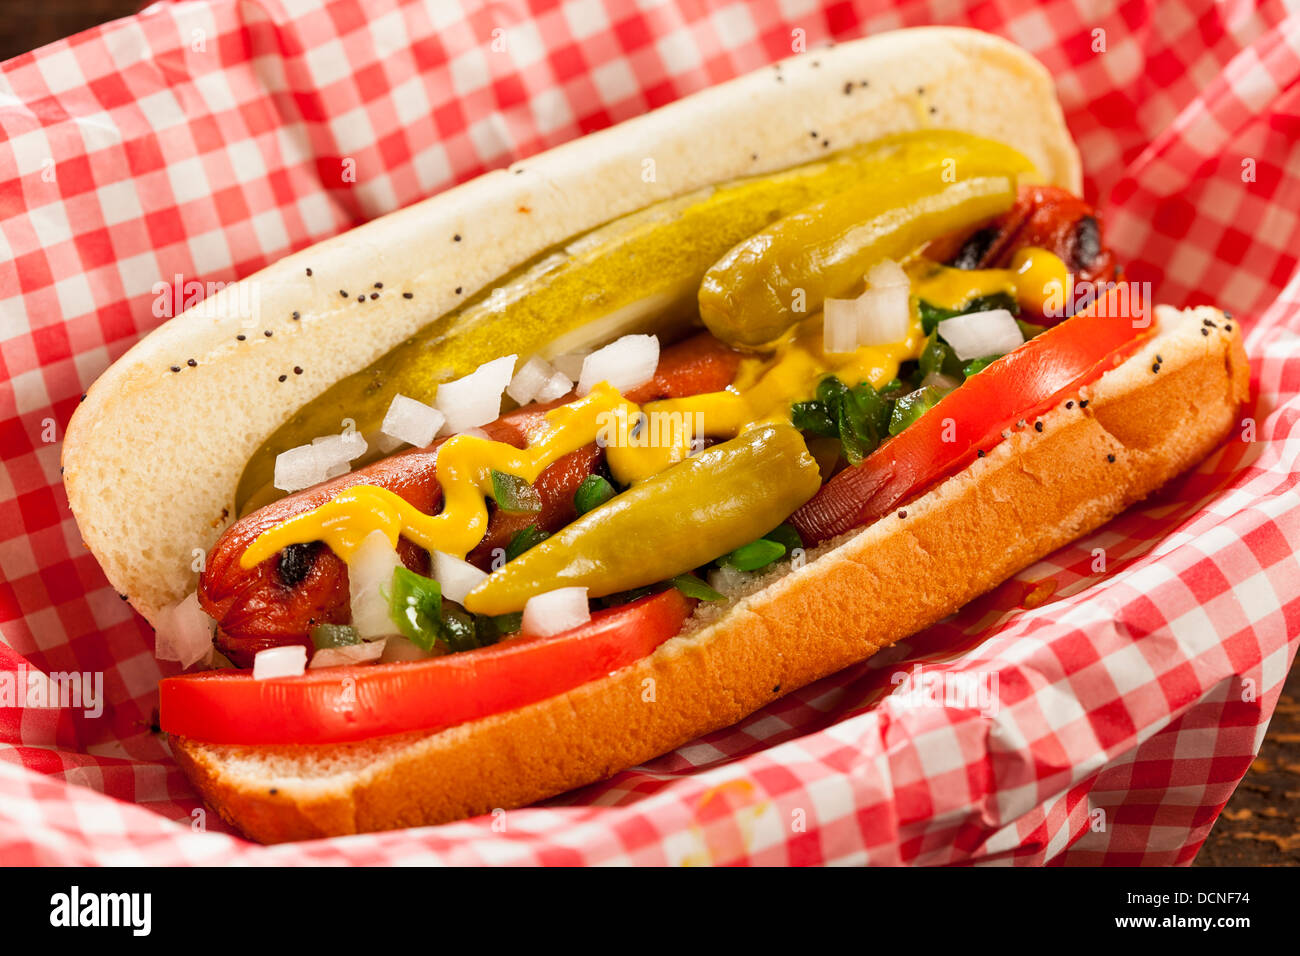 Chicago Style Hot Dog with Mustard, Pickle, Tomato, Relish and Onion Stock Photo